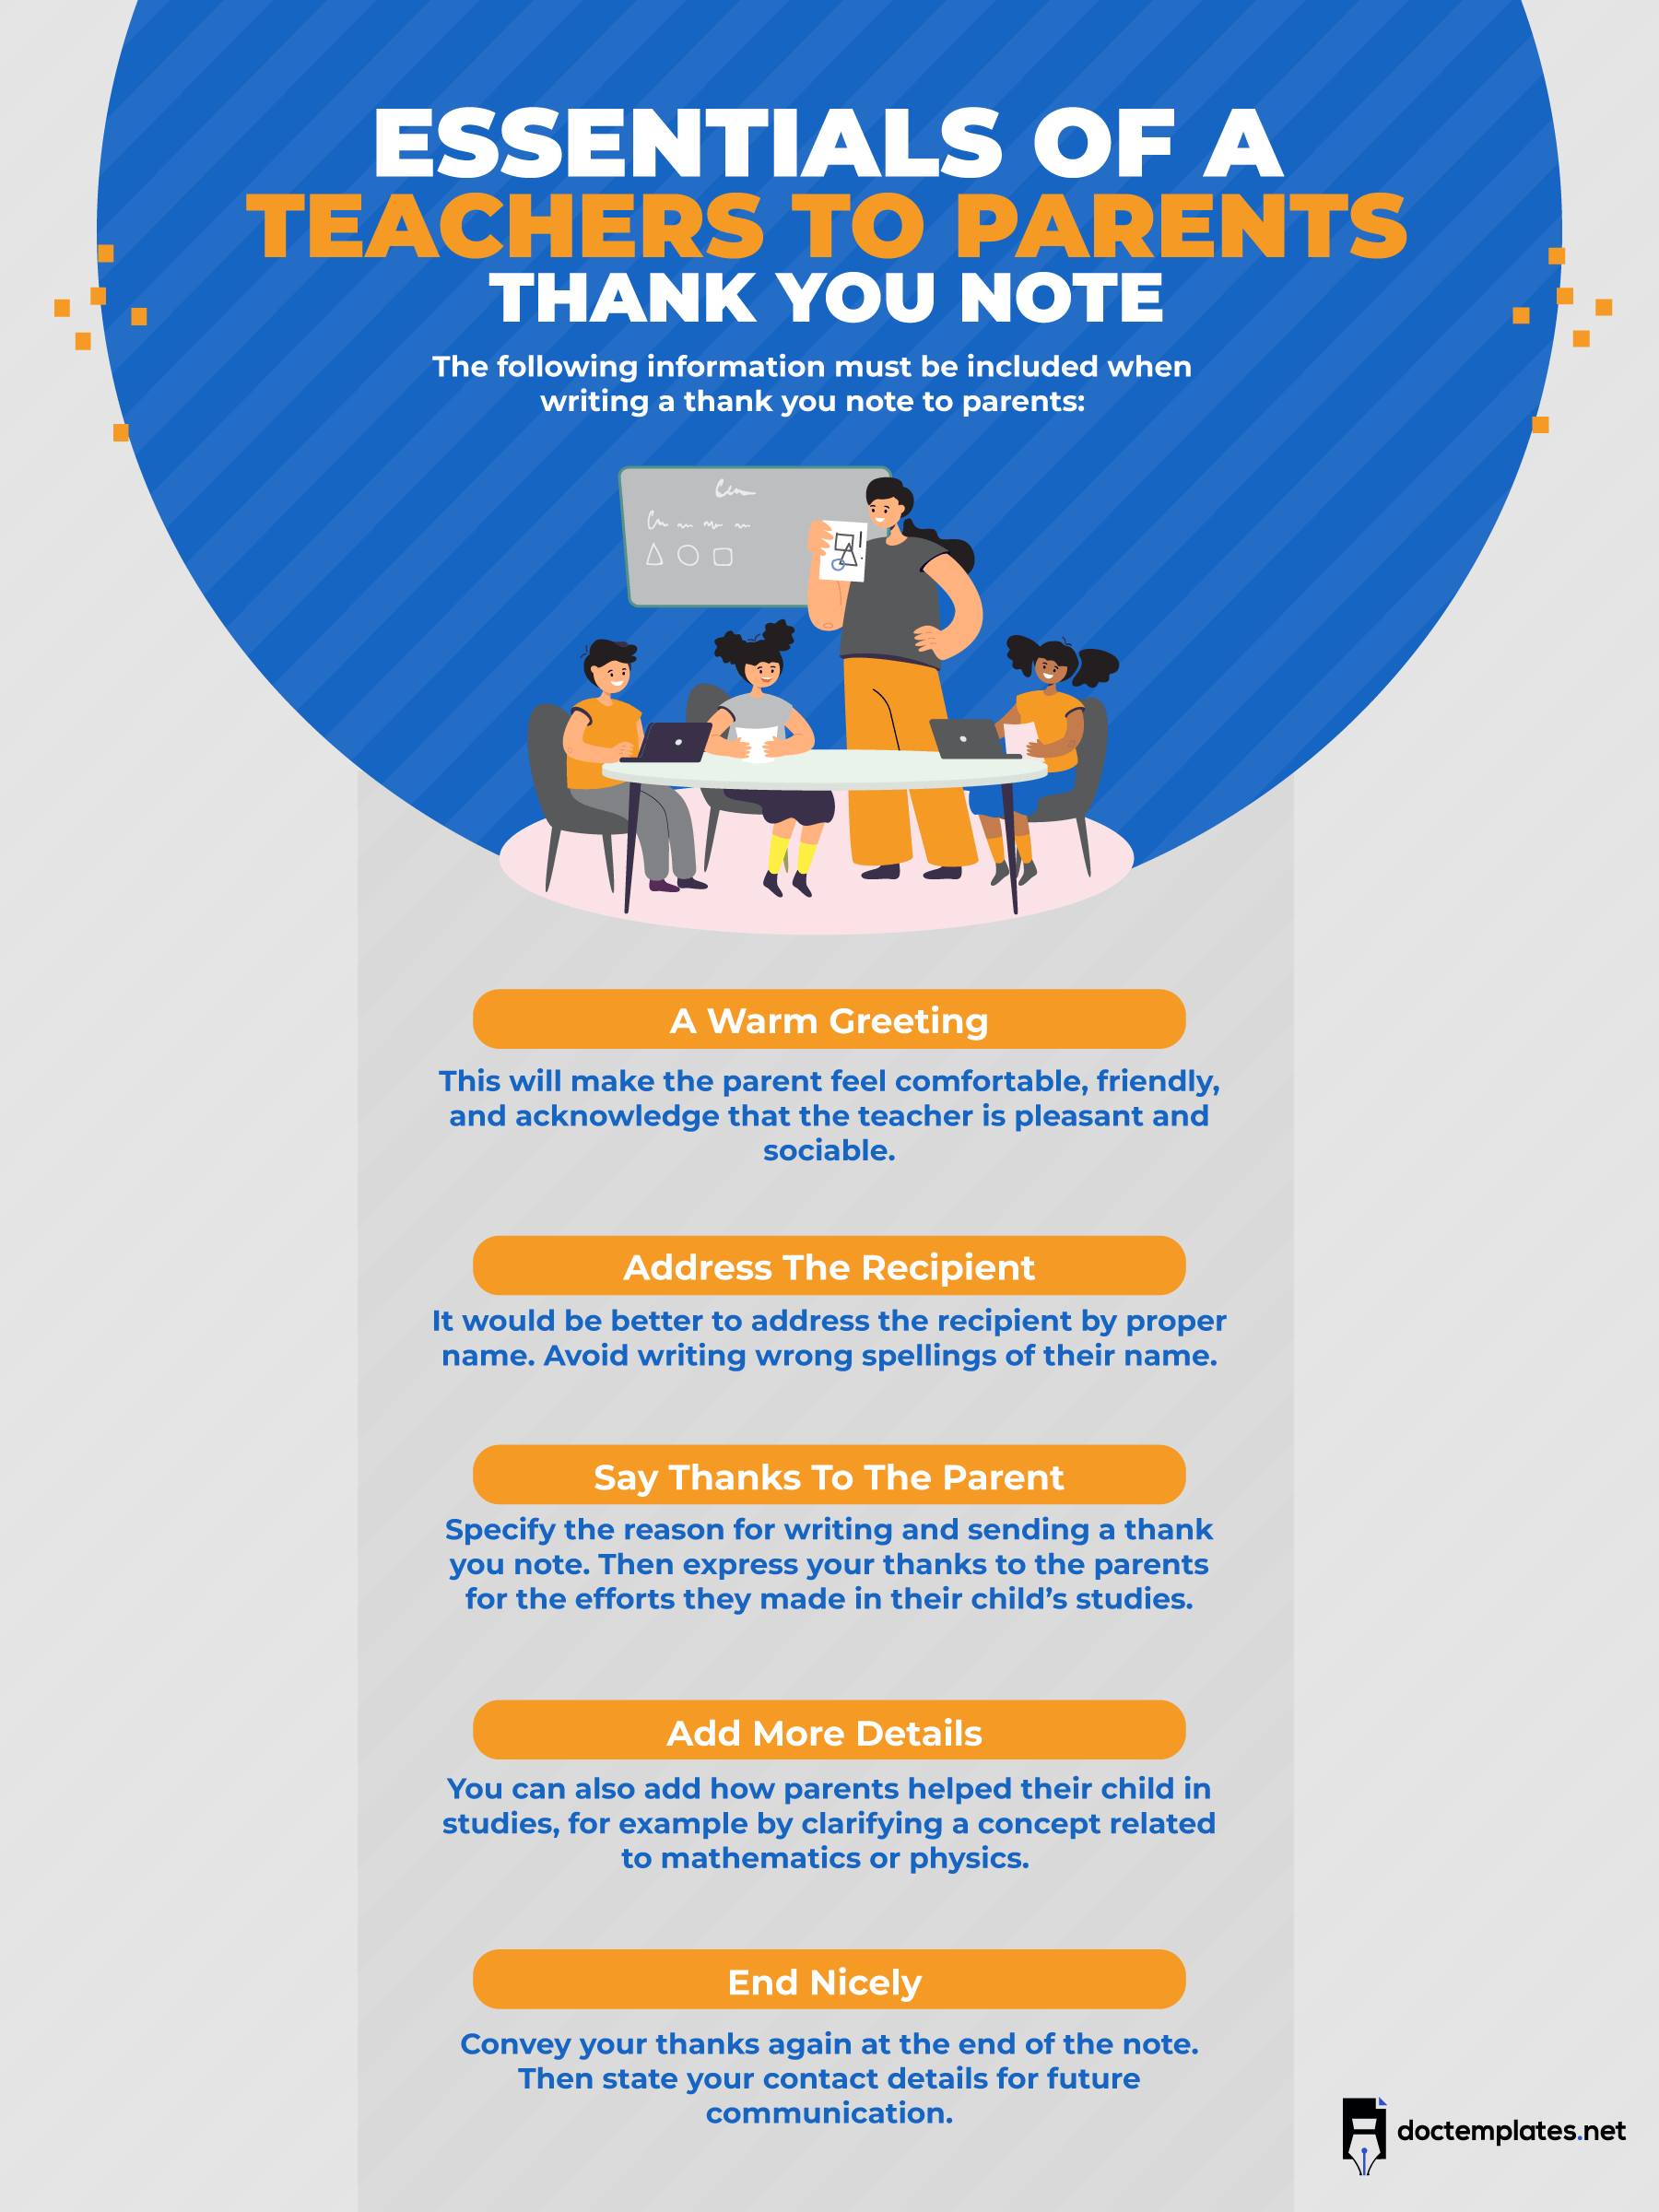 This infographic is about teachers to parents thank you note. 